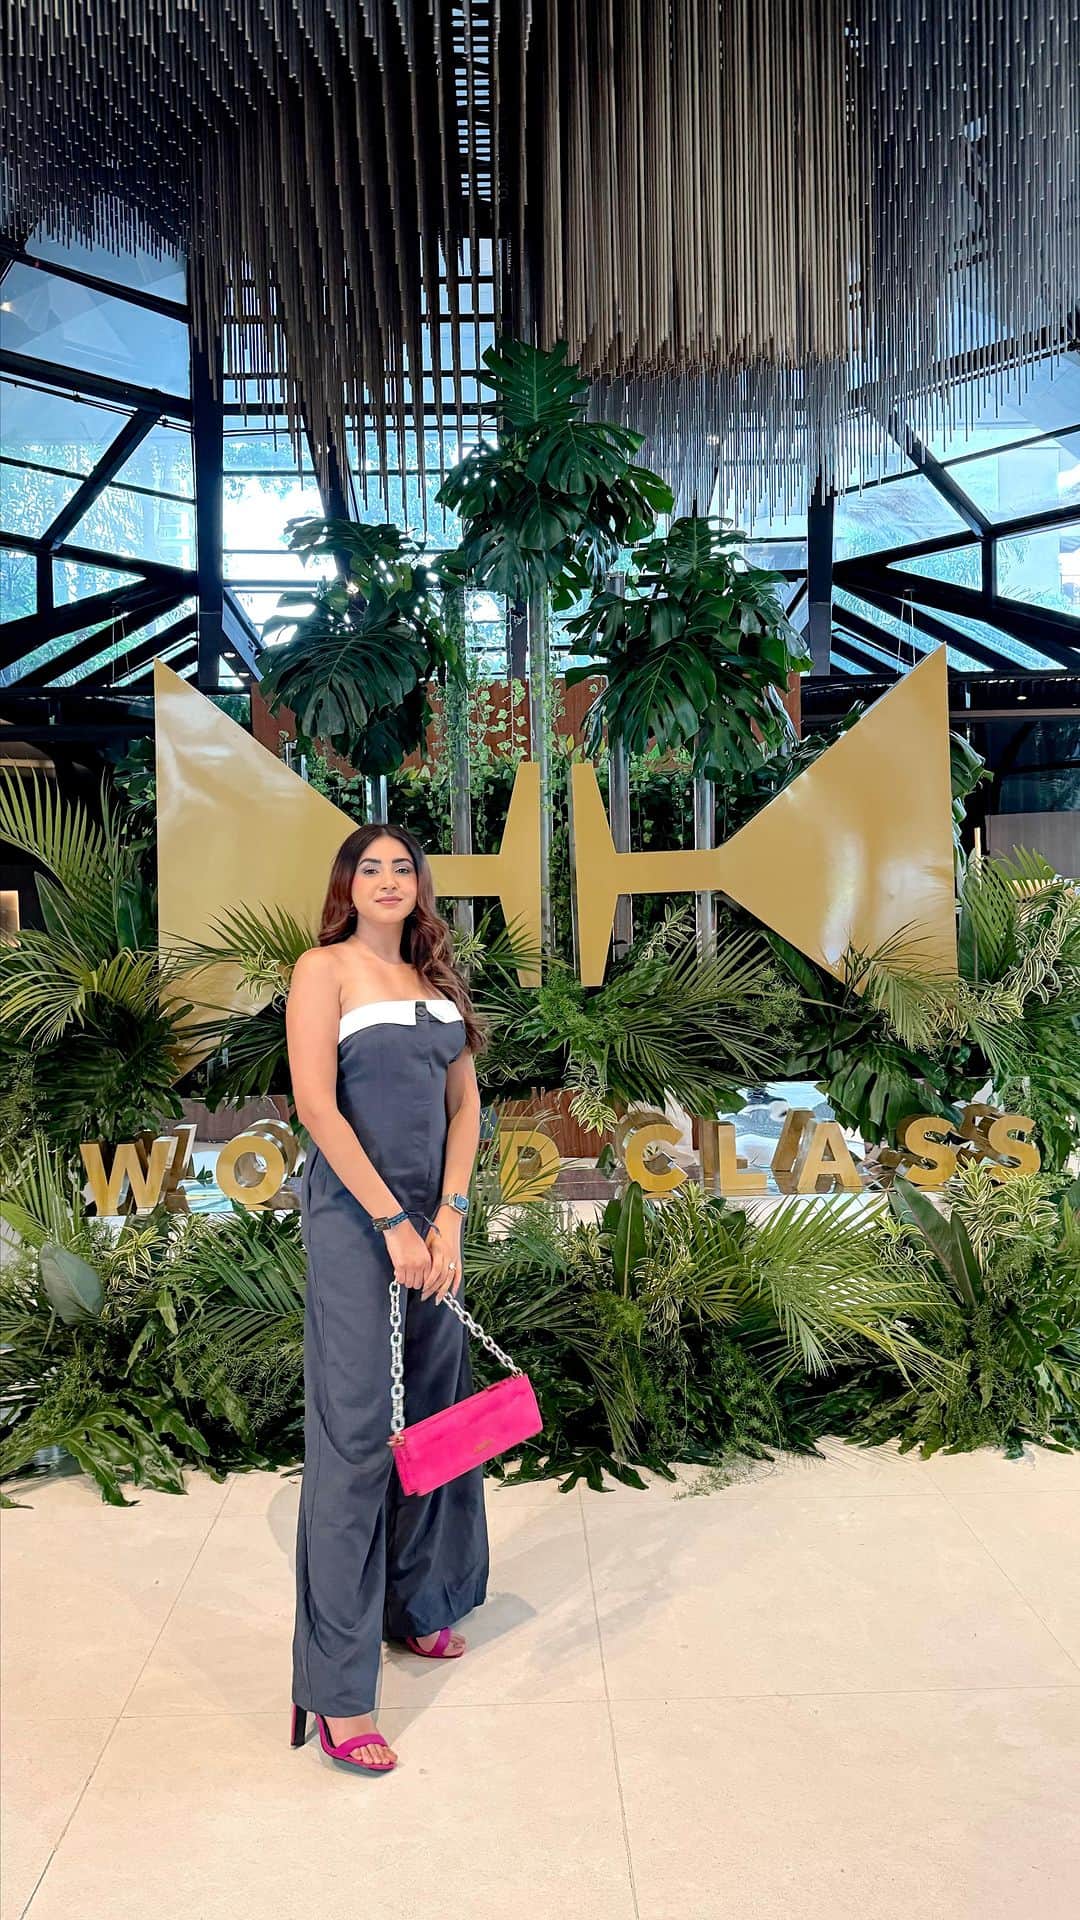 Aashna Shroffのインスタグラム：「Welcome to World Class 2023!!🥂  So excited to be here in São Paulo for the finale, and even more excited that our candidate representing India, @pocket_dynamyte, made it to the top 12 bartenders of the world! The last 2 days have been full of great cocktails and great company, and I can’t wait for the finale tonight!✨  @worldclass @worldclassin  #WorldClass2023 #MakeItWorldClass #AGlassOfWorldClass #IndiaatWorldClass #WorldClassIndia #DrinkResponsibly  @tanquerayindia #MakeItATen #NoTen」